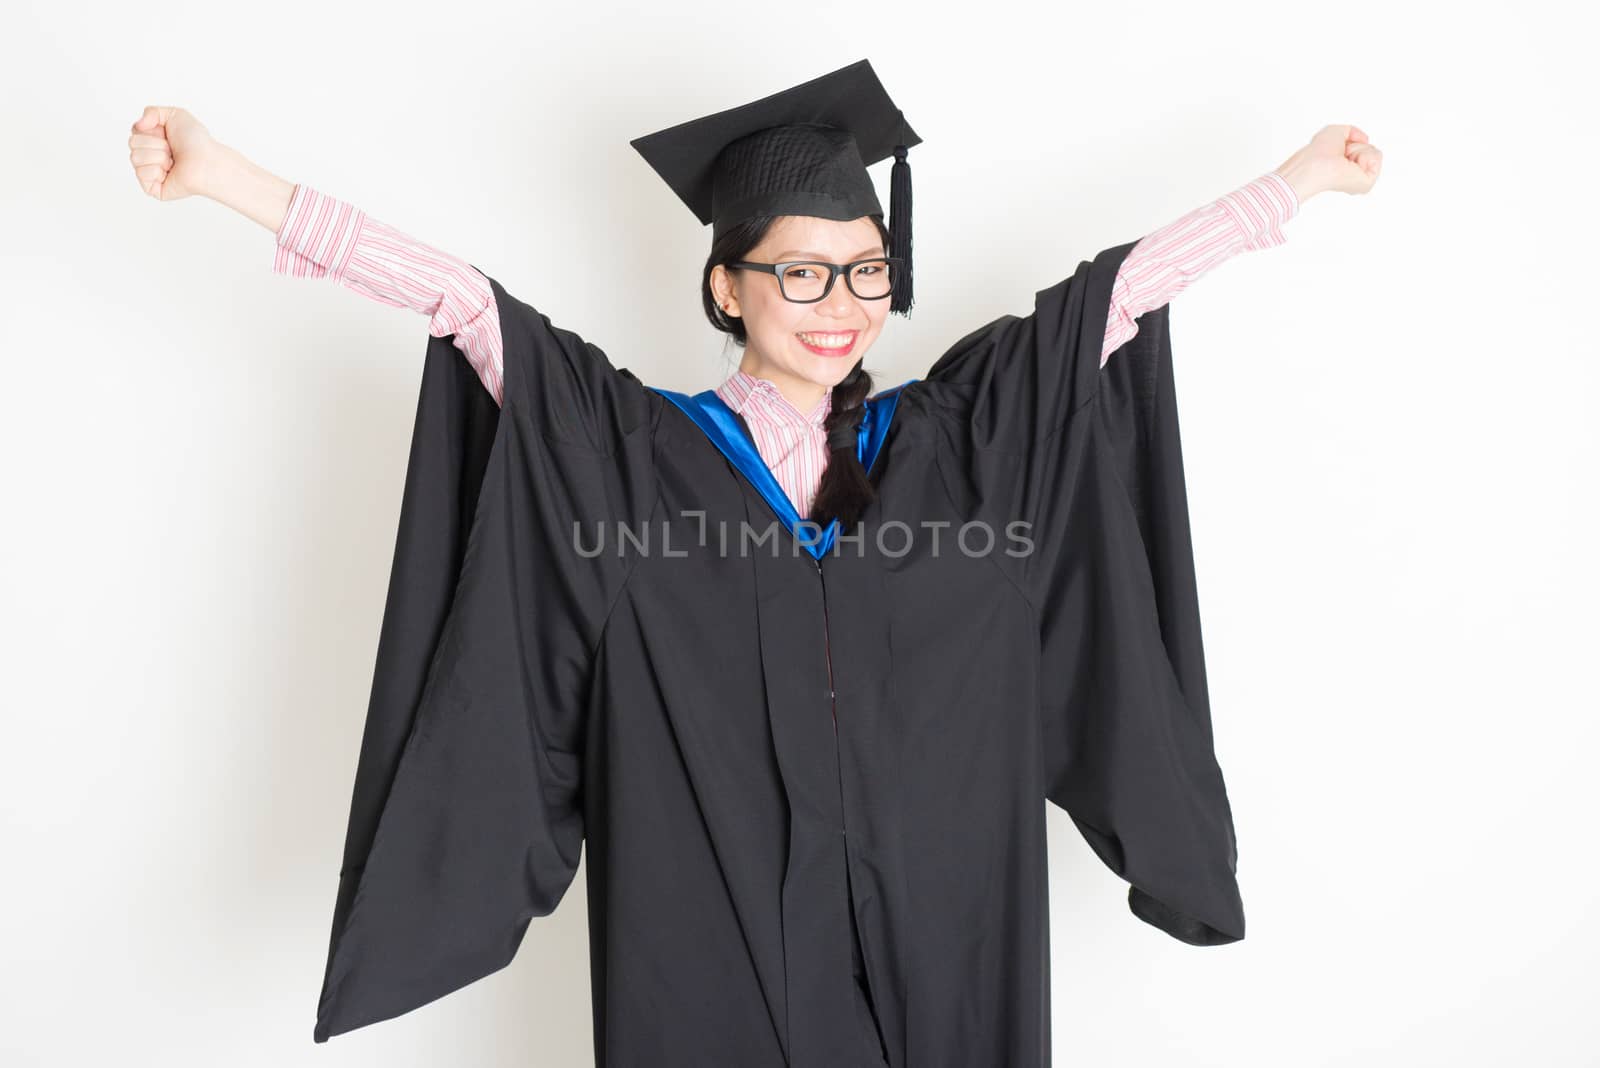 Happy university student in graduation gown and cap arms outstretched and smiling. Portrait of east  Asian female model standing on plain background.